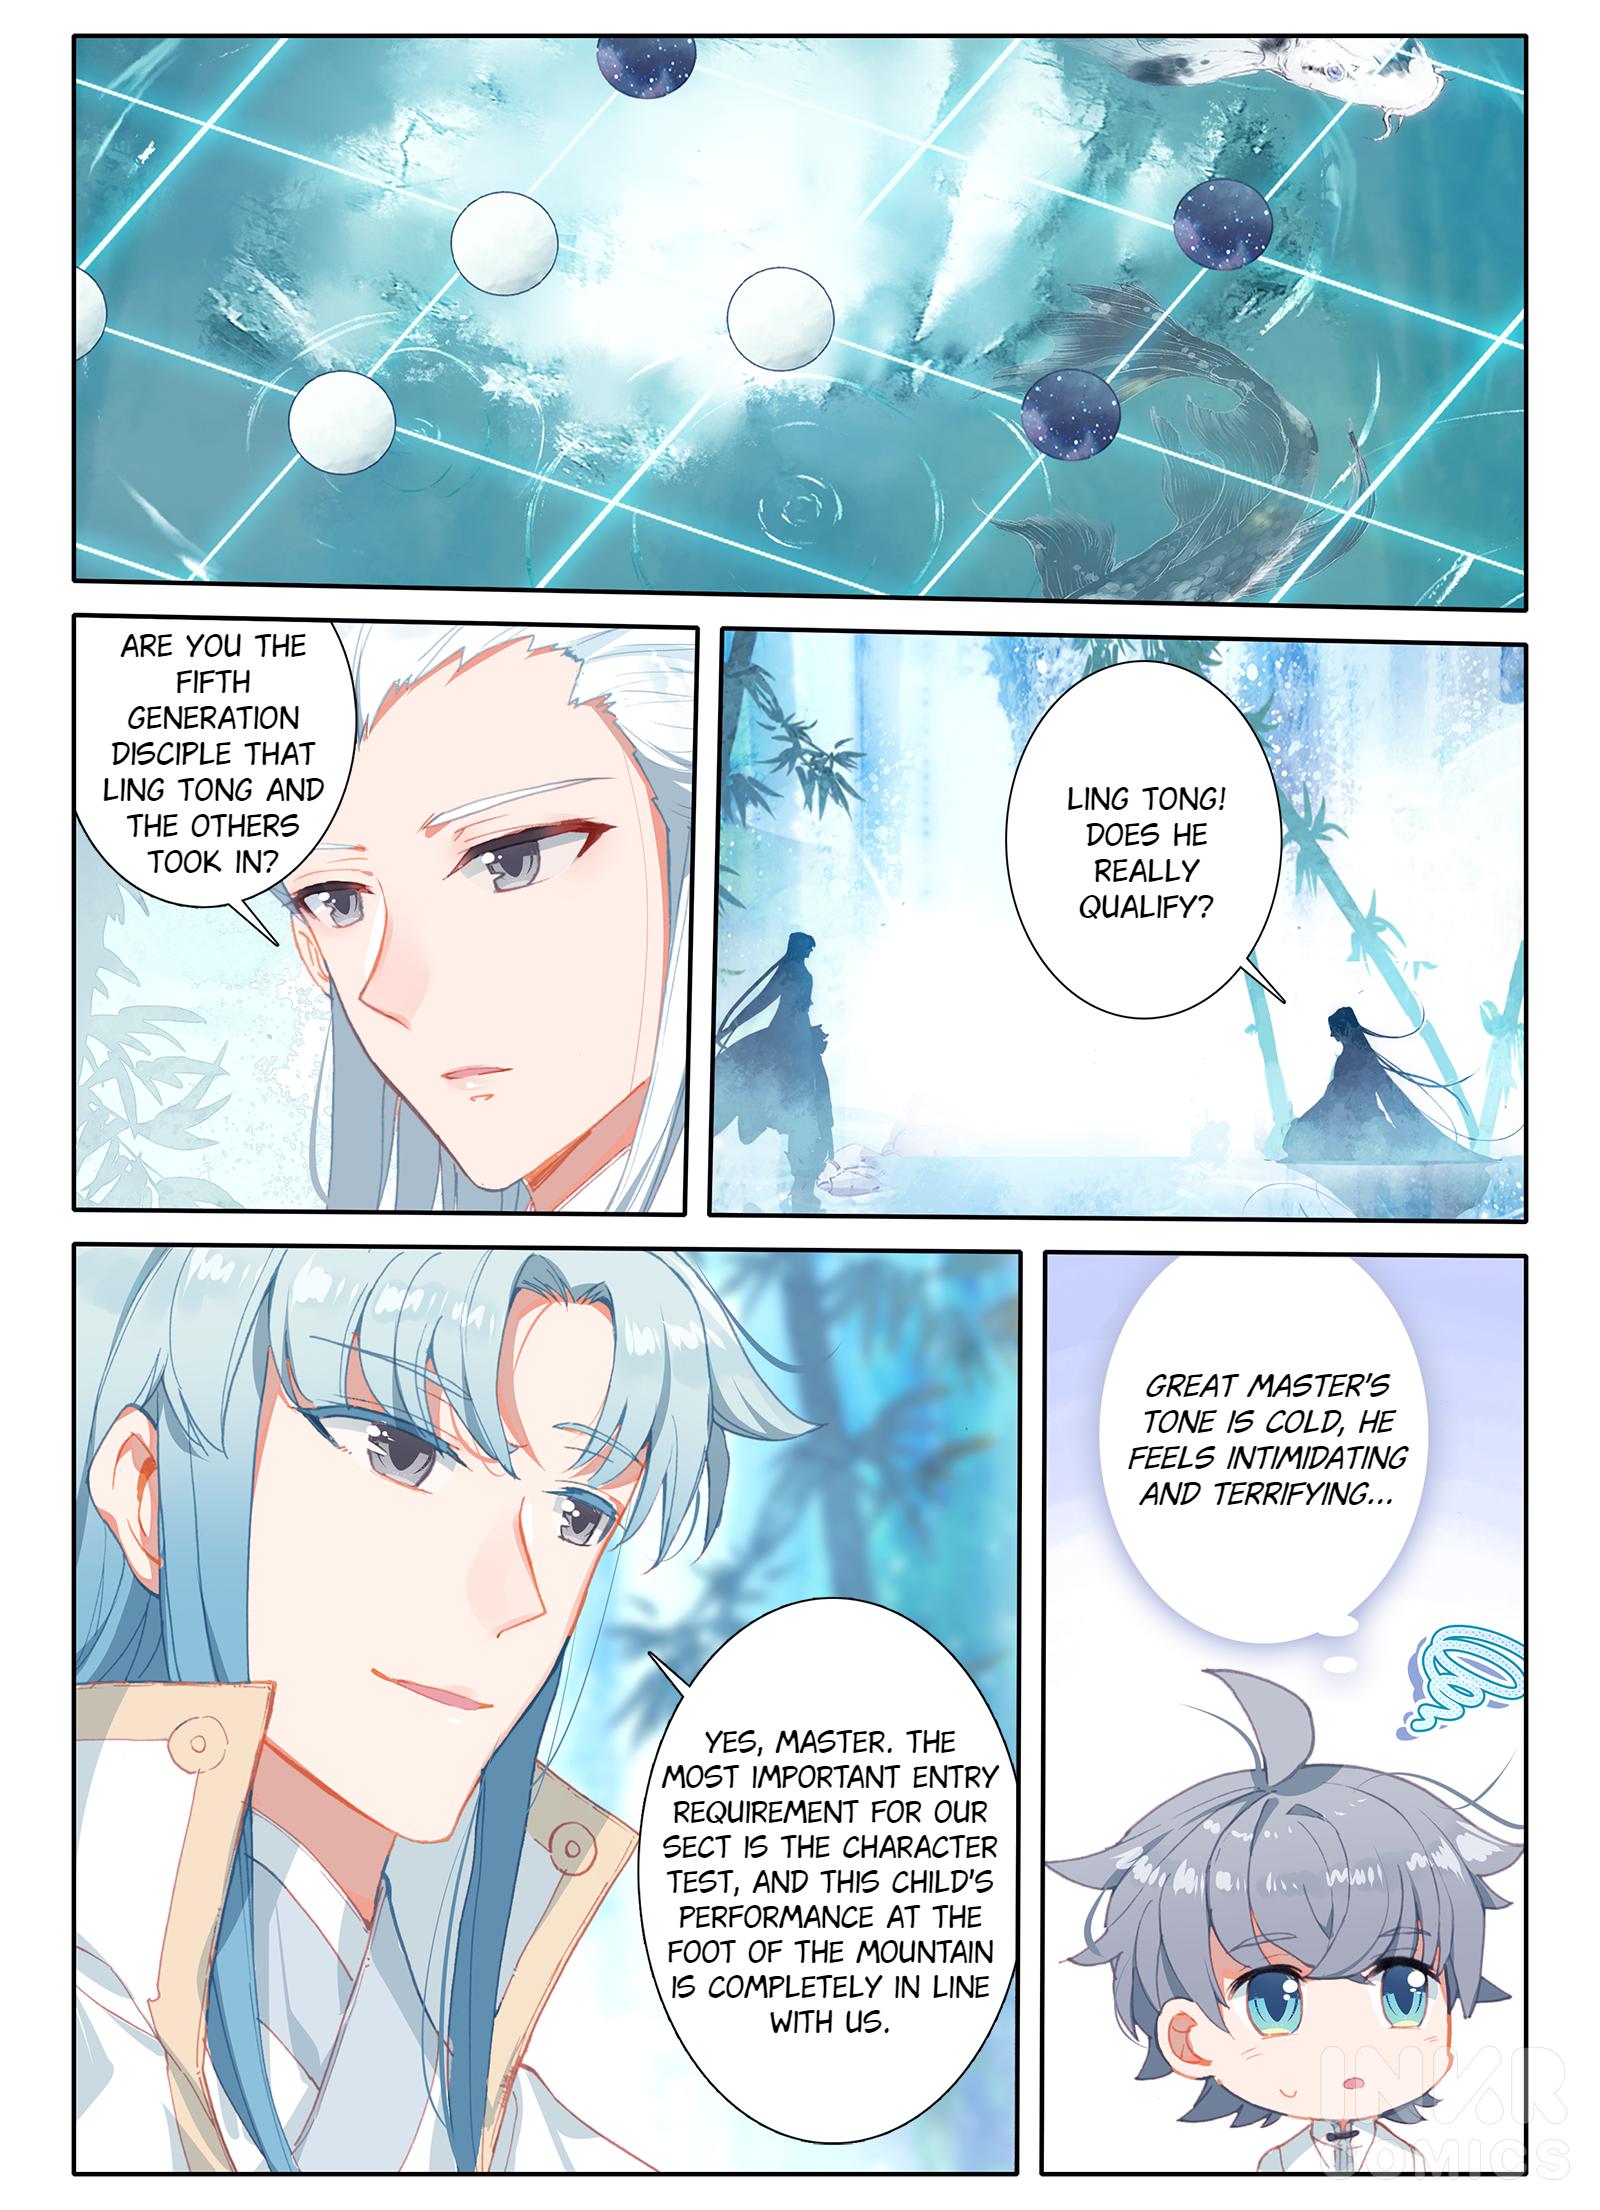 Only I Shall Be Immortal - Page 1